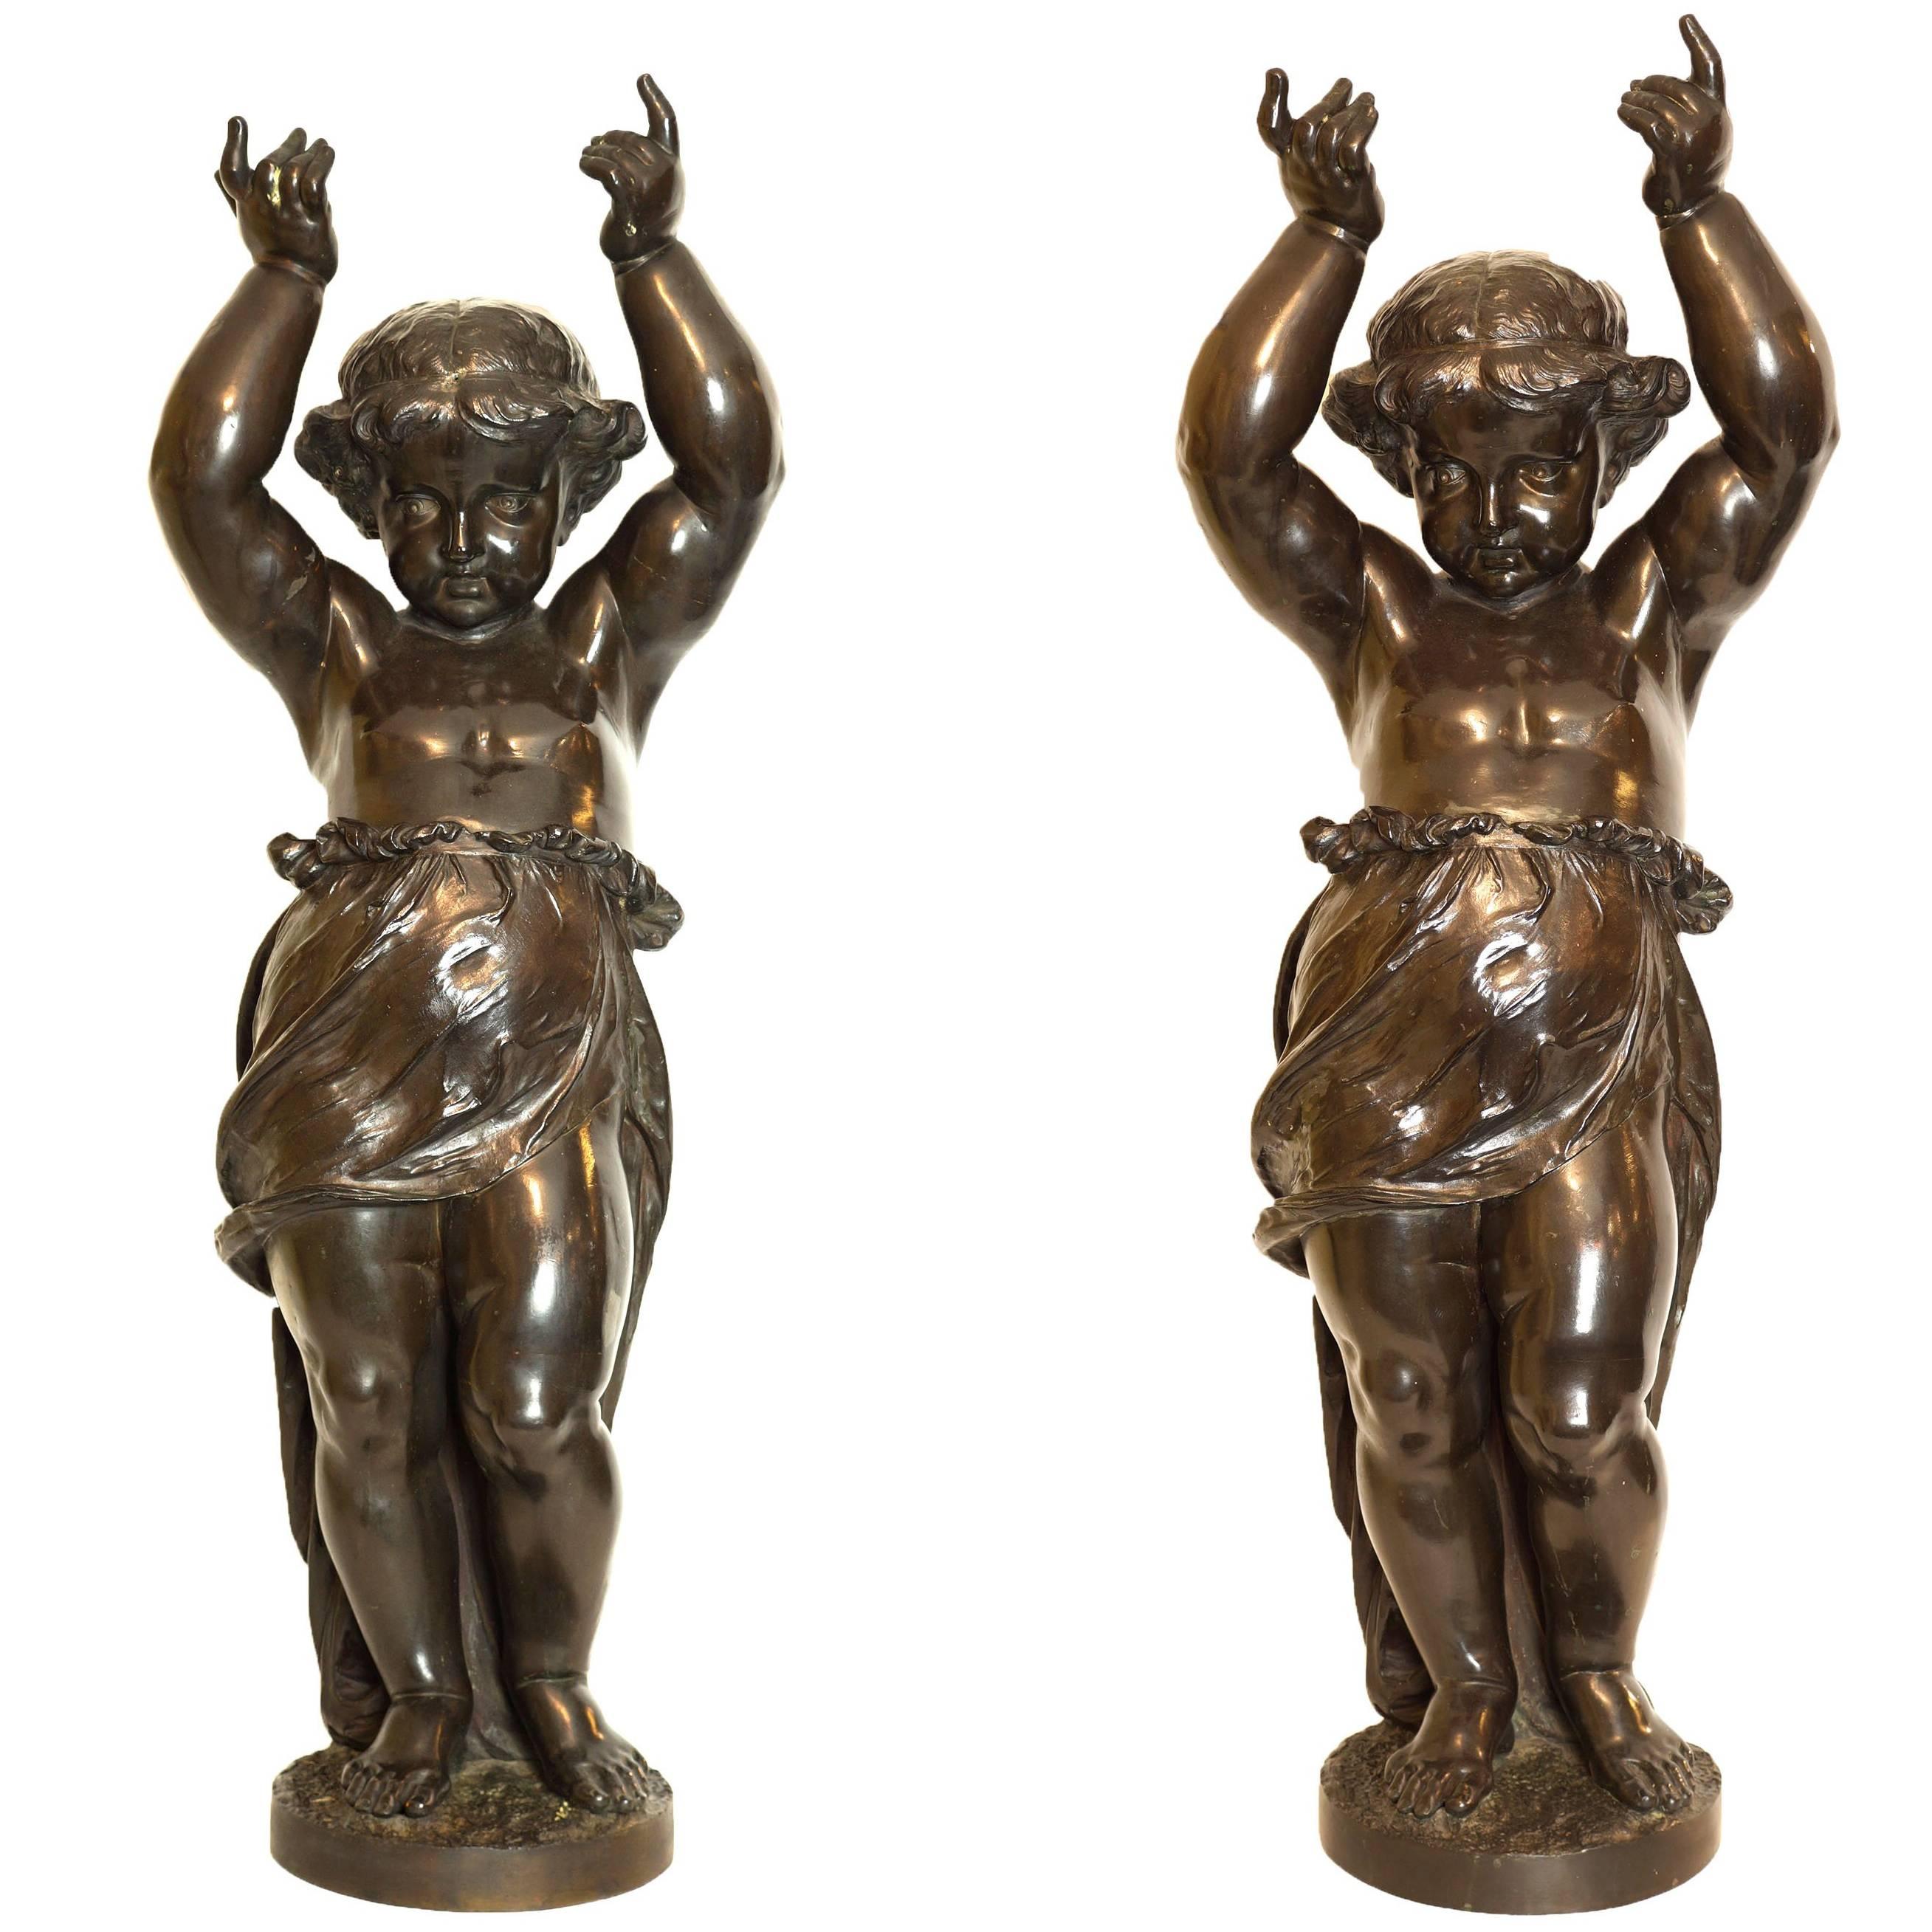 Pair of Very Large French, 19th Century Bronze Cherub Statues Signed A. Moreau